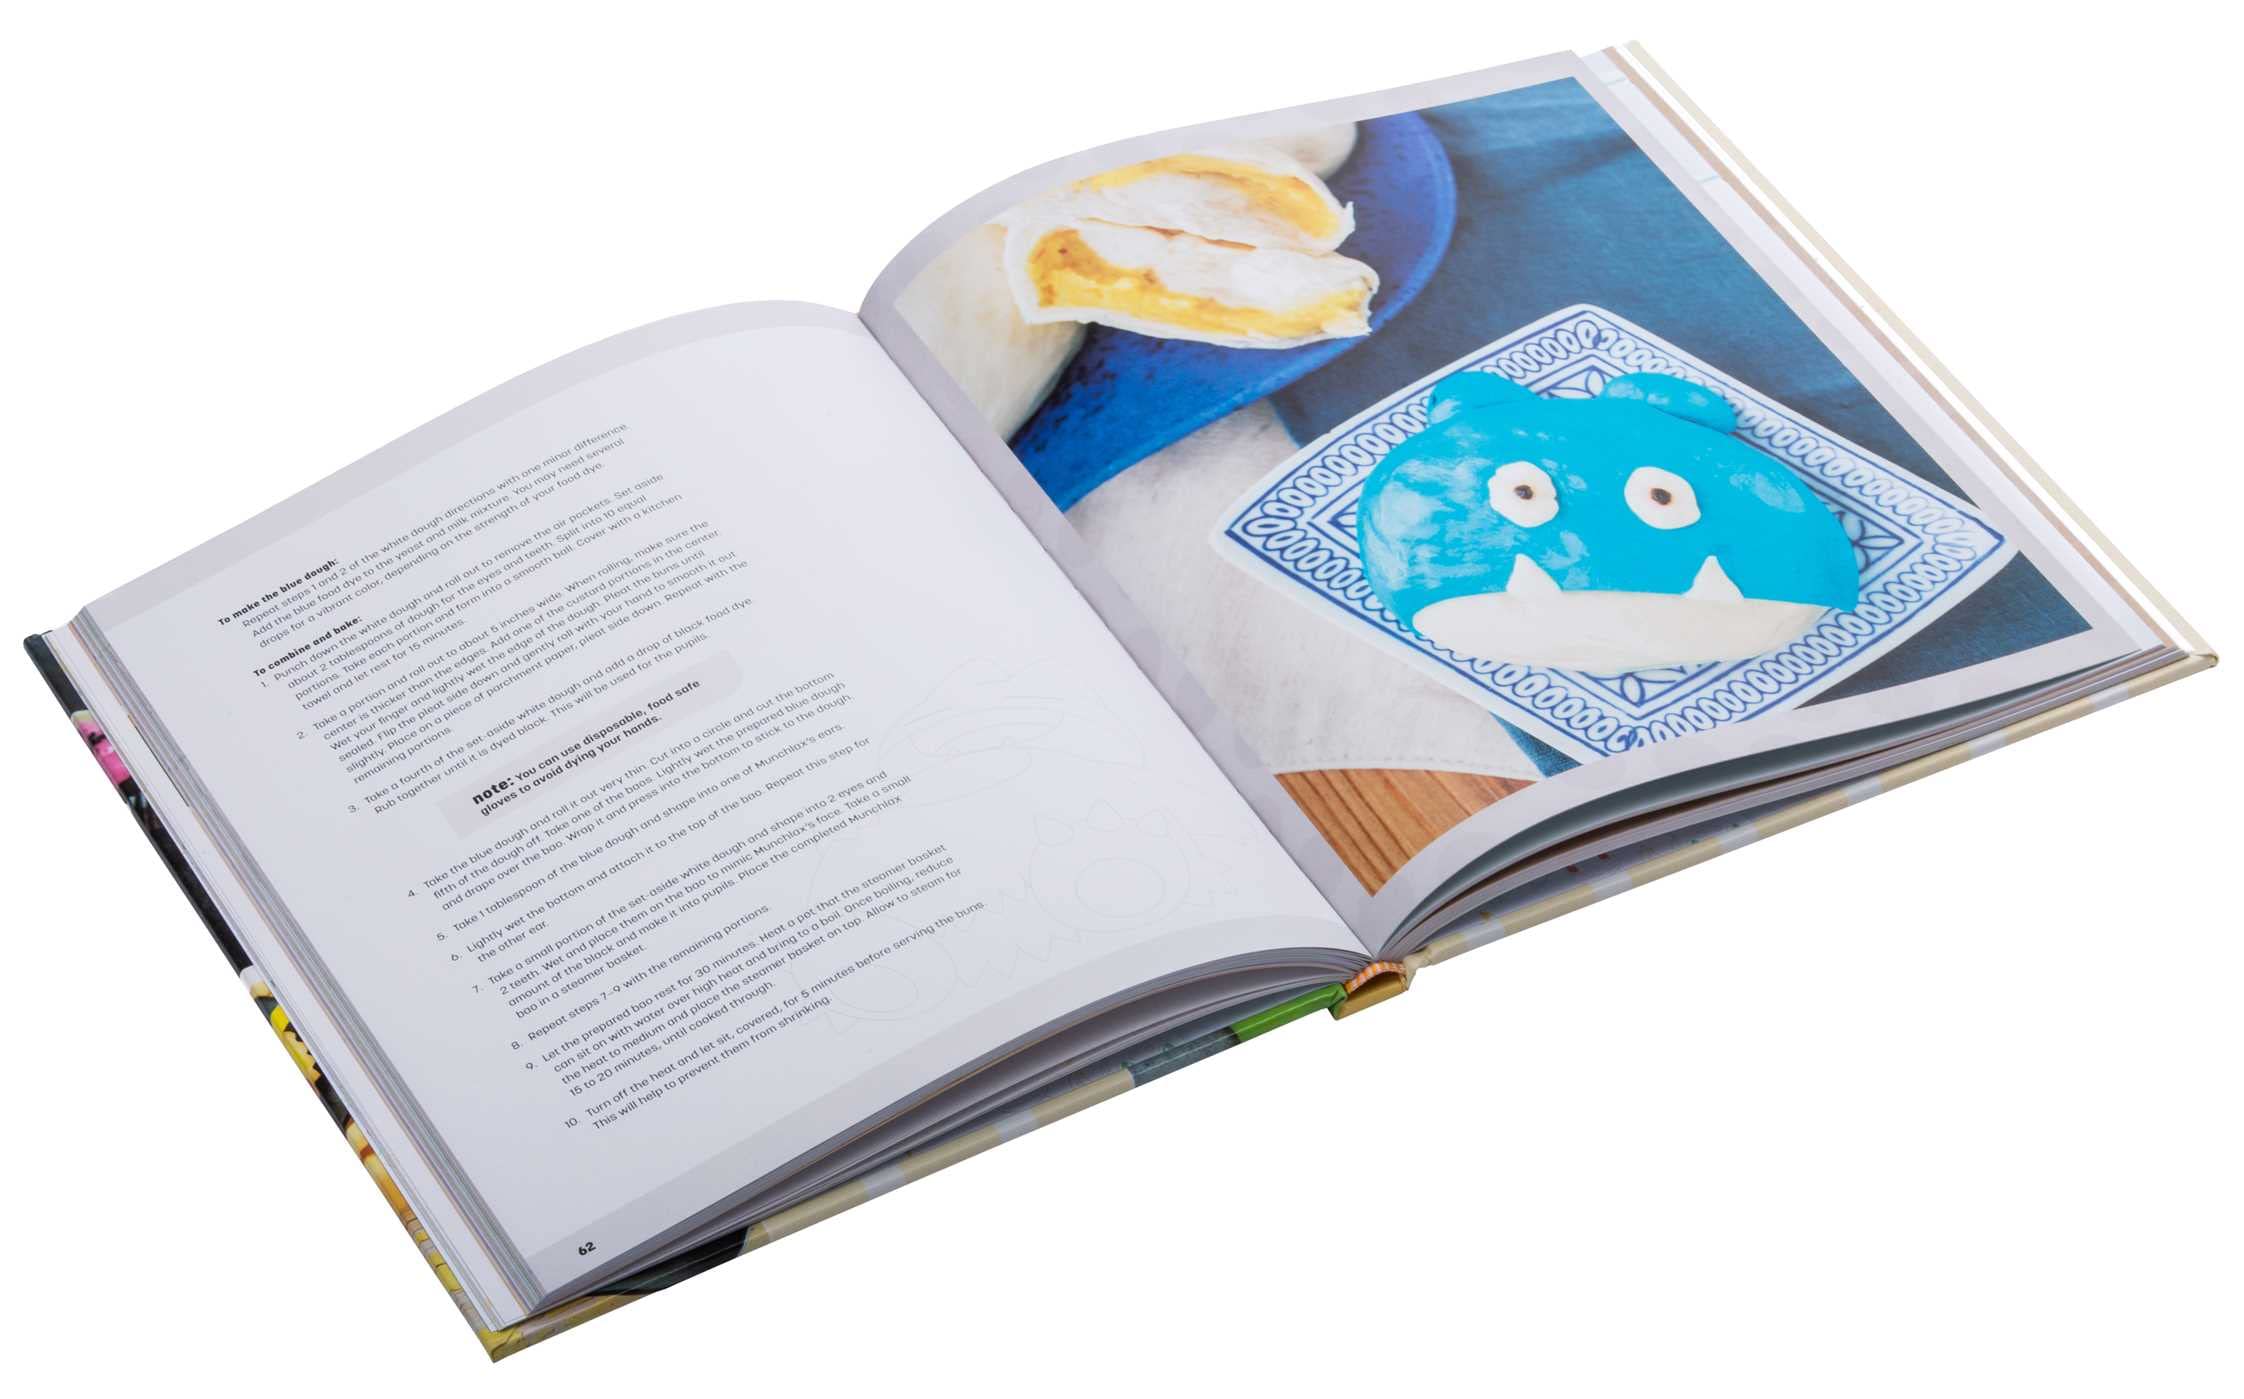 My Pokémon Cookbook: Delicious Recipes Inspired by Pikachu and Friends (Pokemon)